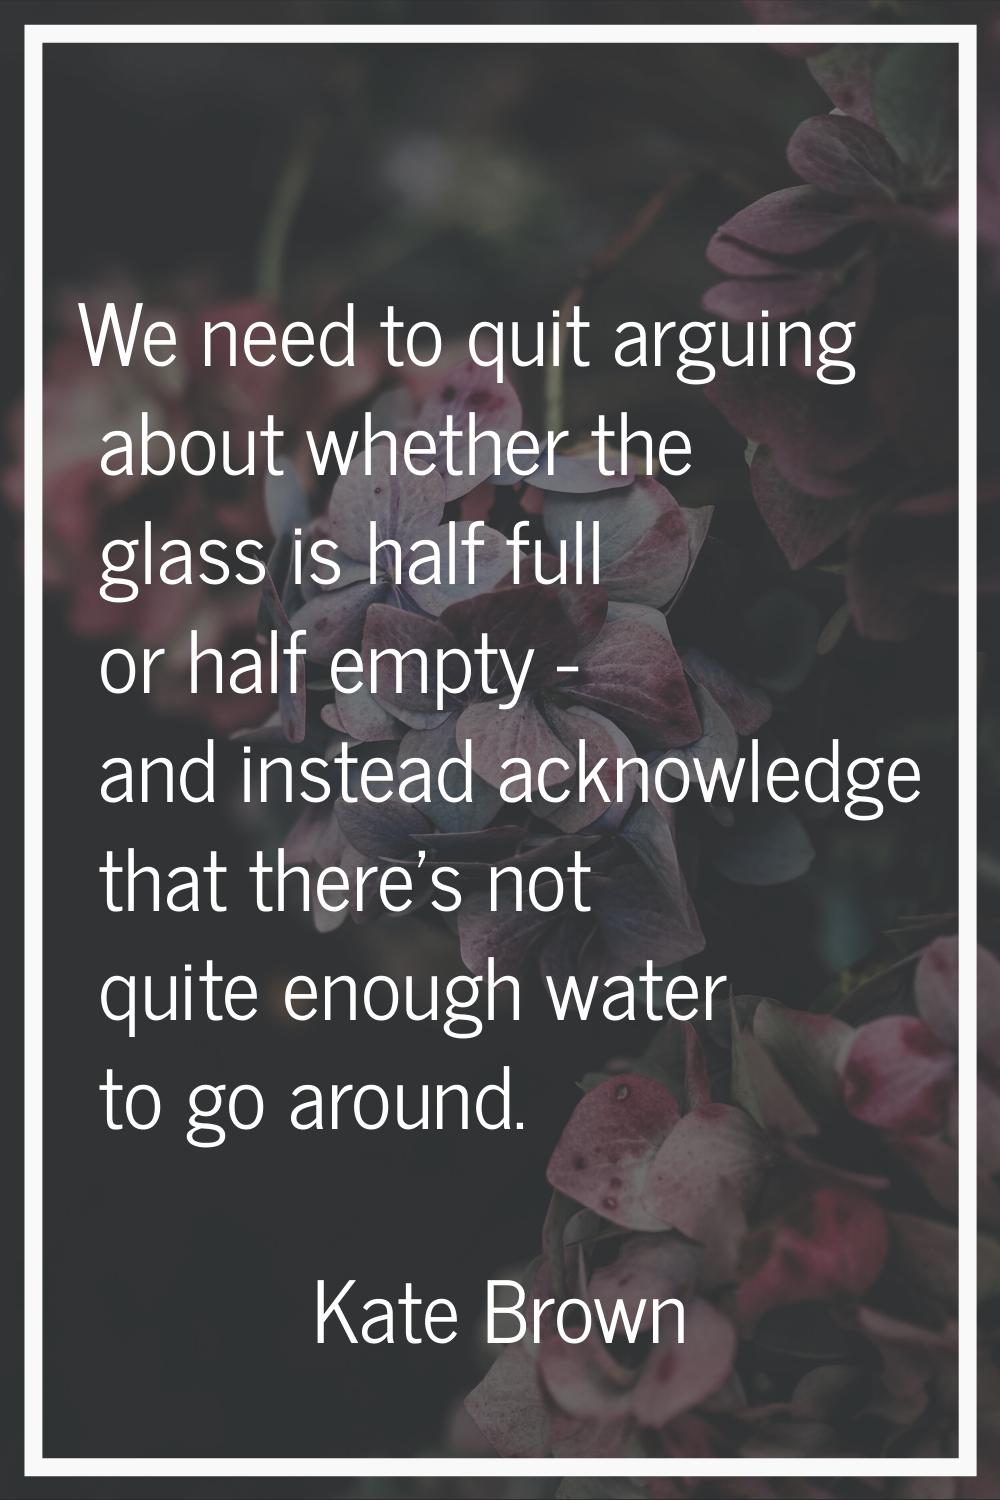 We need to quit arguing about whether the glass is half full or half empty - and instead acknowledg